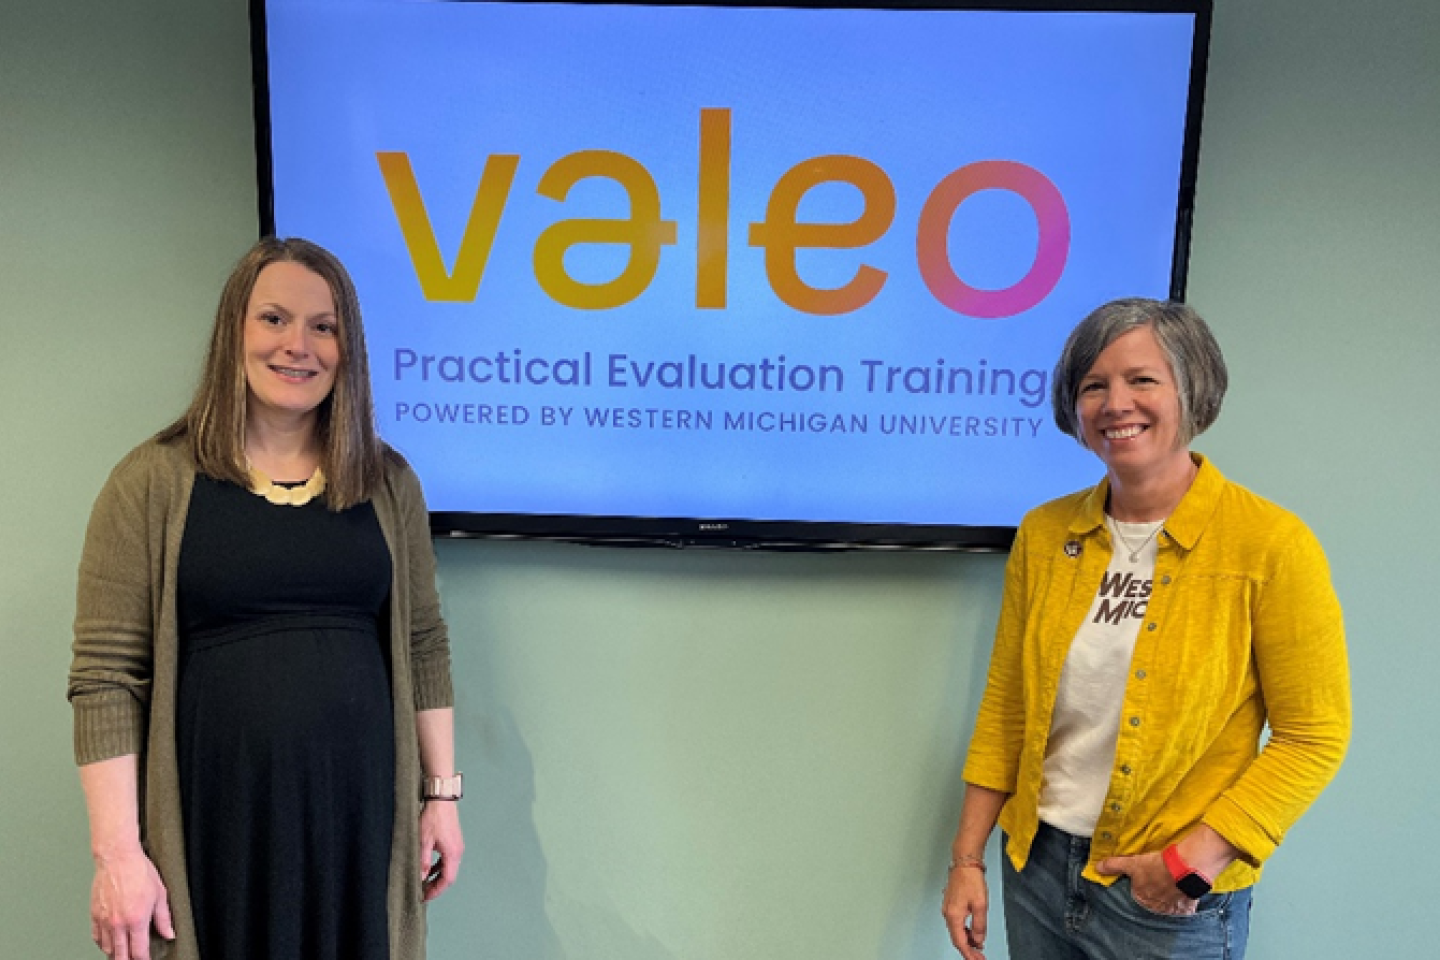 Kelly Robertson and Lori Wingate stand next to a sign that says "Valeo."